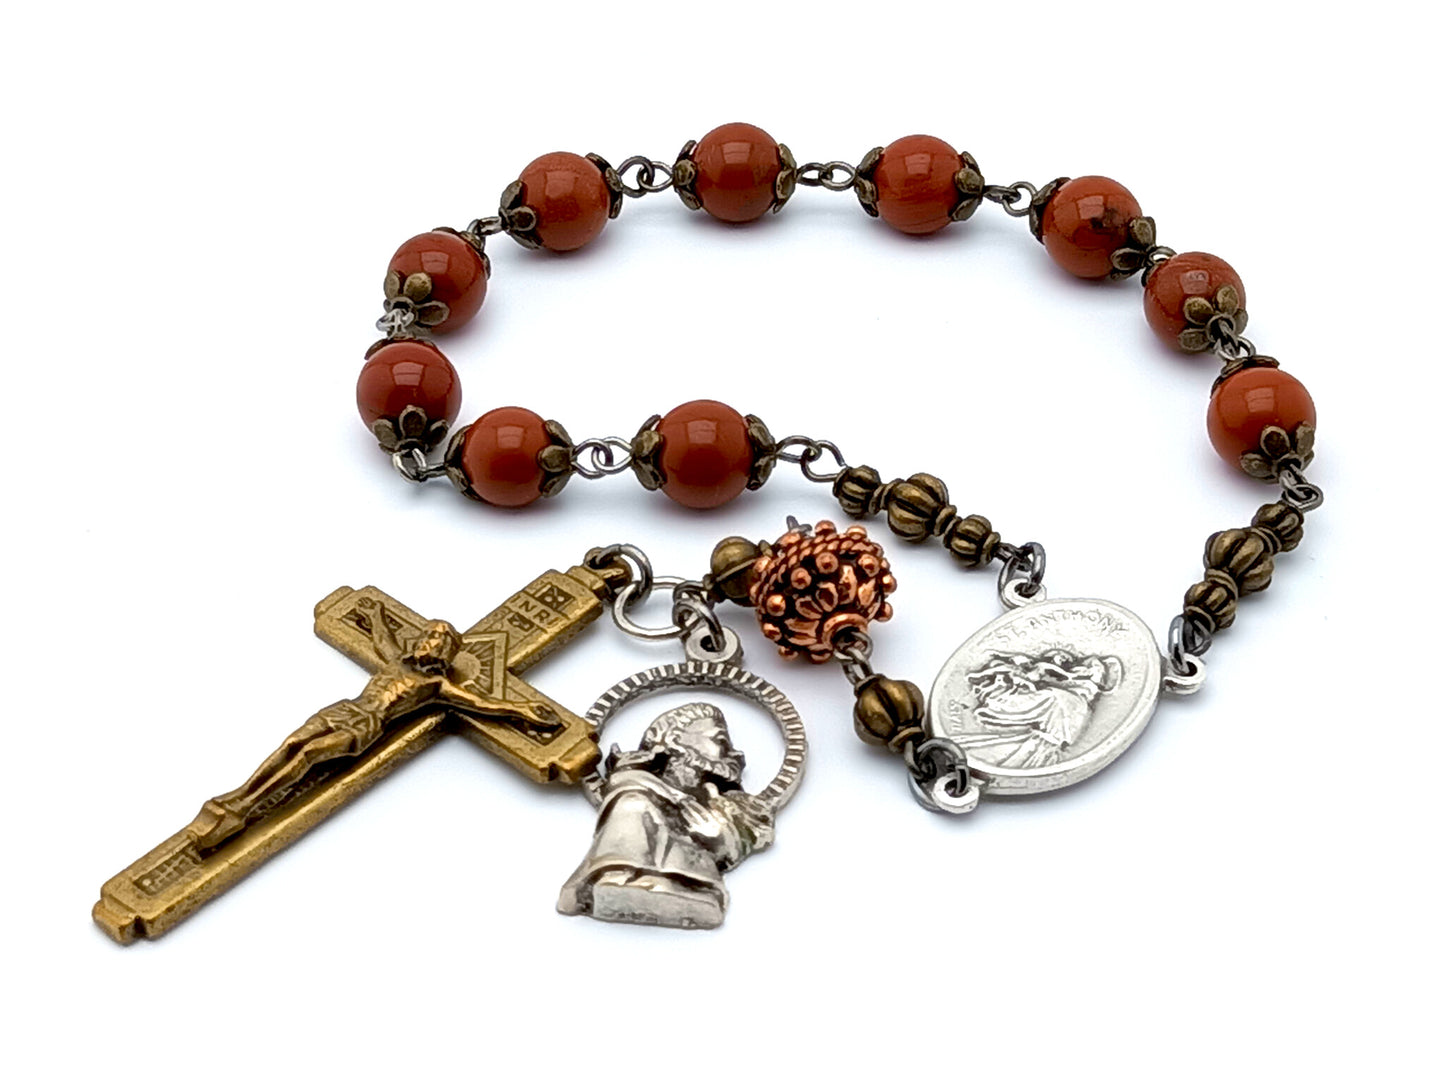 Saint Francis vintage style single decade jasper gemstone rosary beads with relic medal.